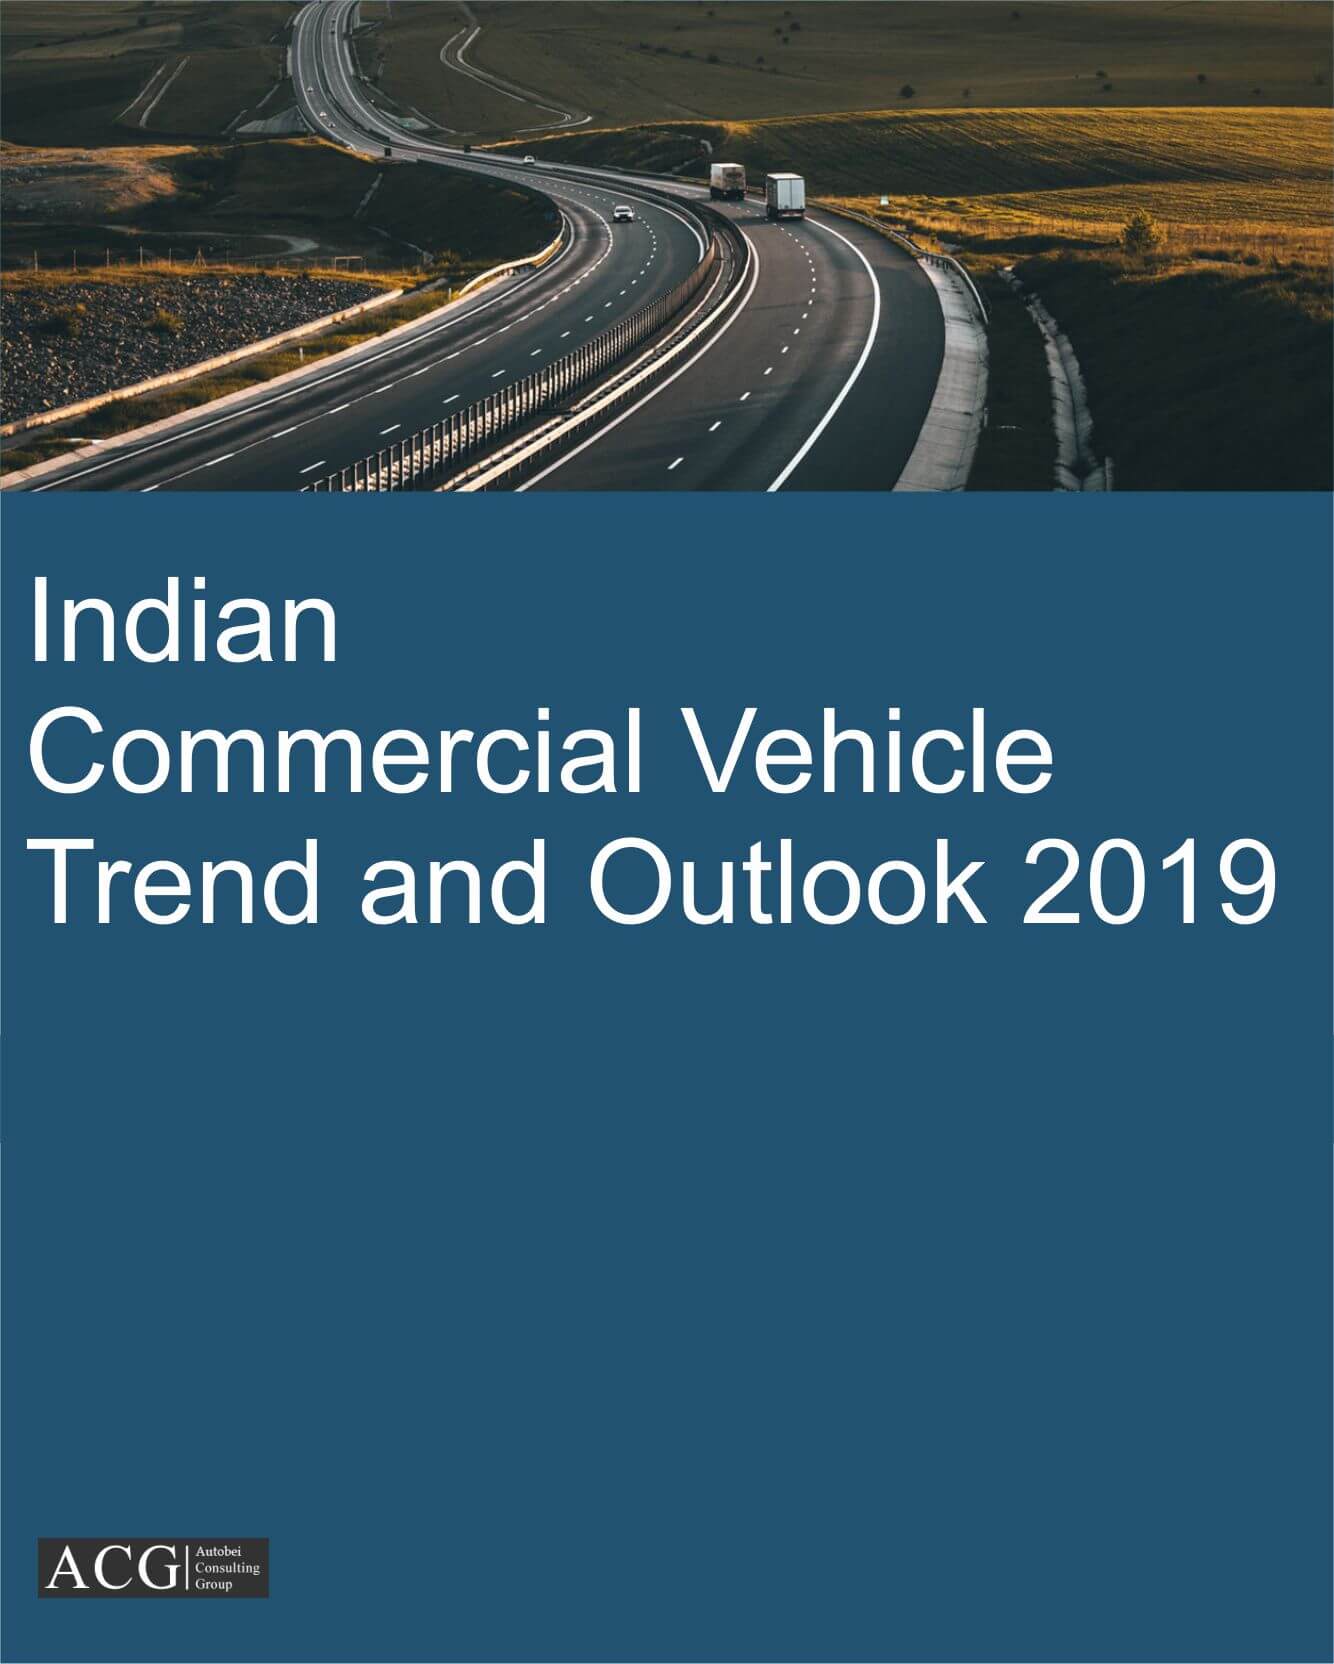 Indian Commercial Vehicle Trend and Outlook 2019